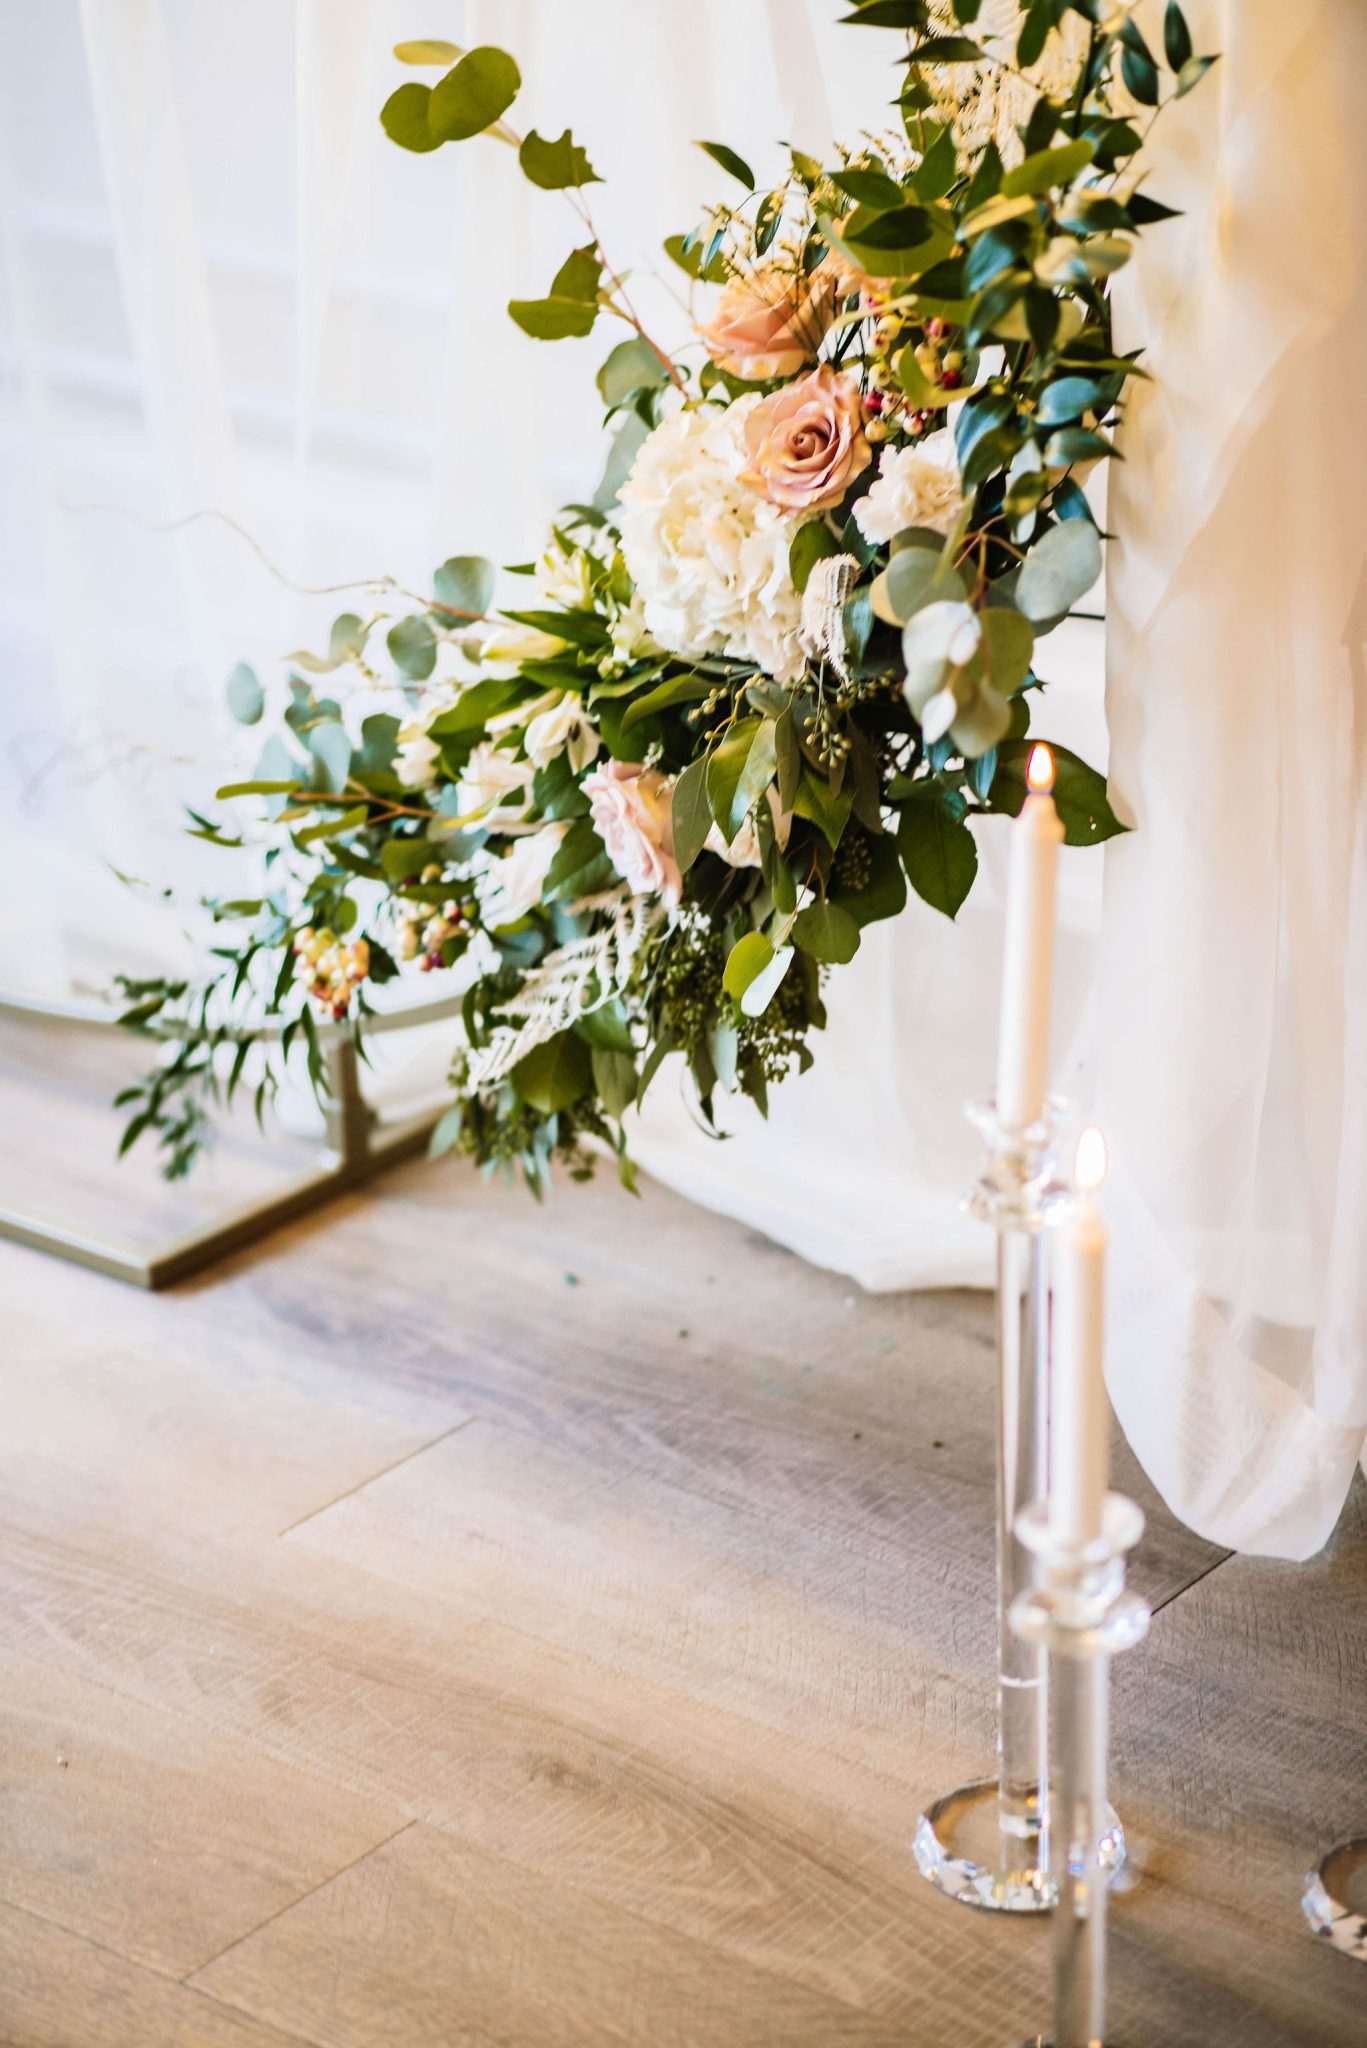 Enchanting ballroom wedding design inspiration with lush greenery and classic candles